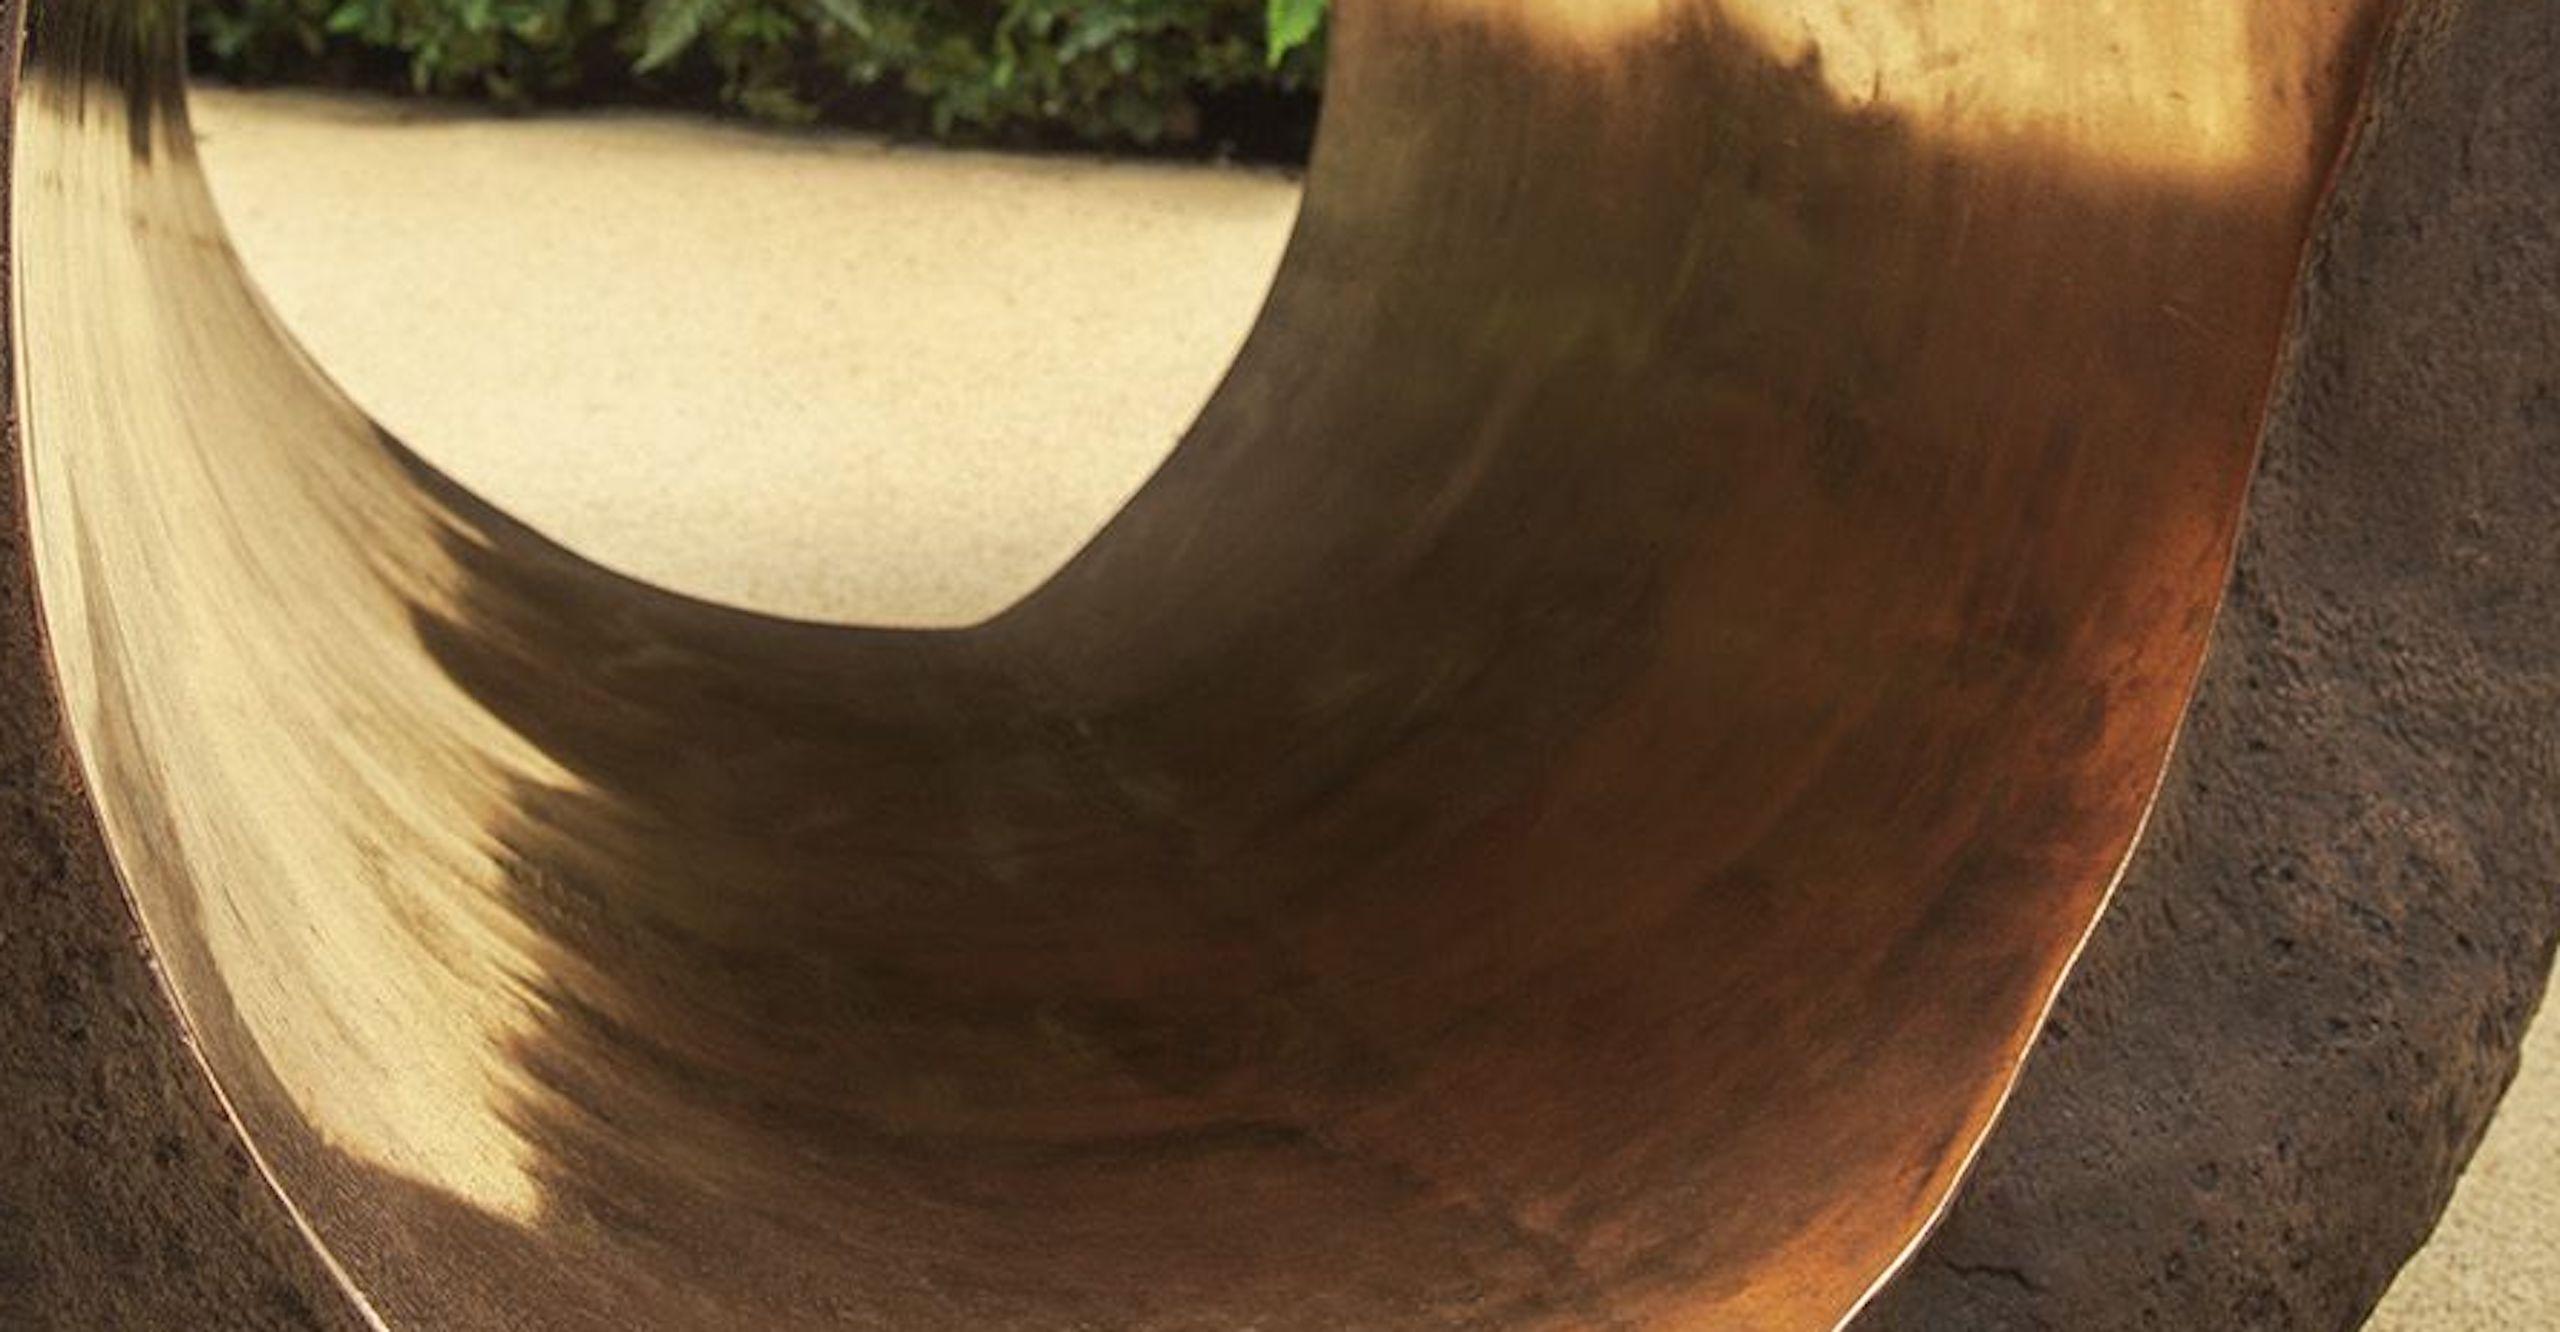 Boulder #3 – The Tunnel is a bronze sculpture by contemporary artist Tom Price, dimensions are 90 × 150 × 140 cm (35.4 × 59.1 × 55.1 in). 
This artwork is available on commission. It will be created on the same basis as shown in the images and under